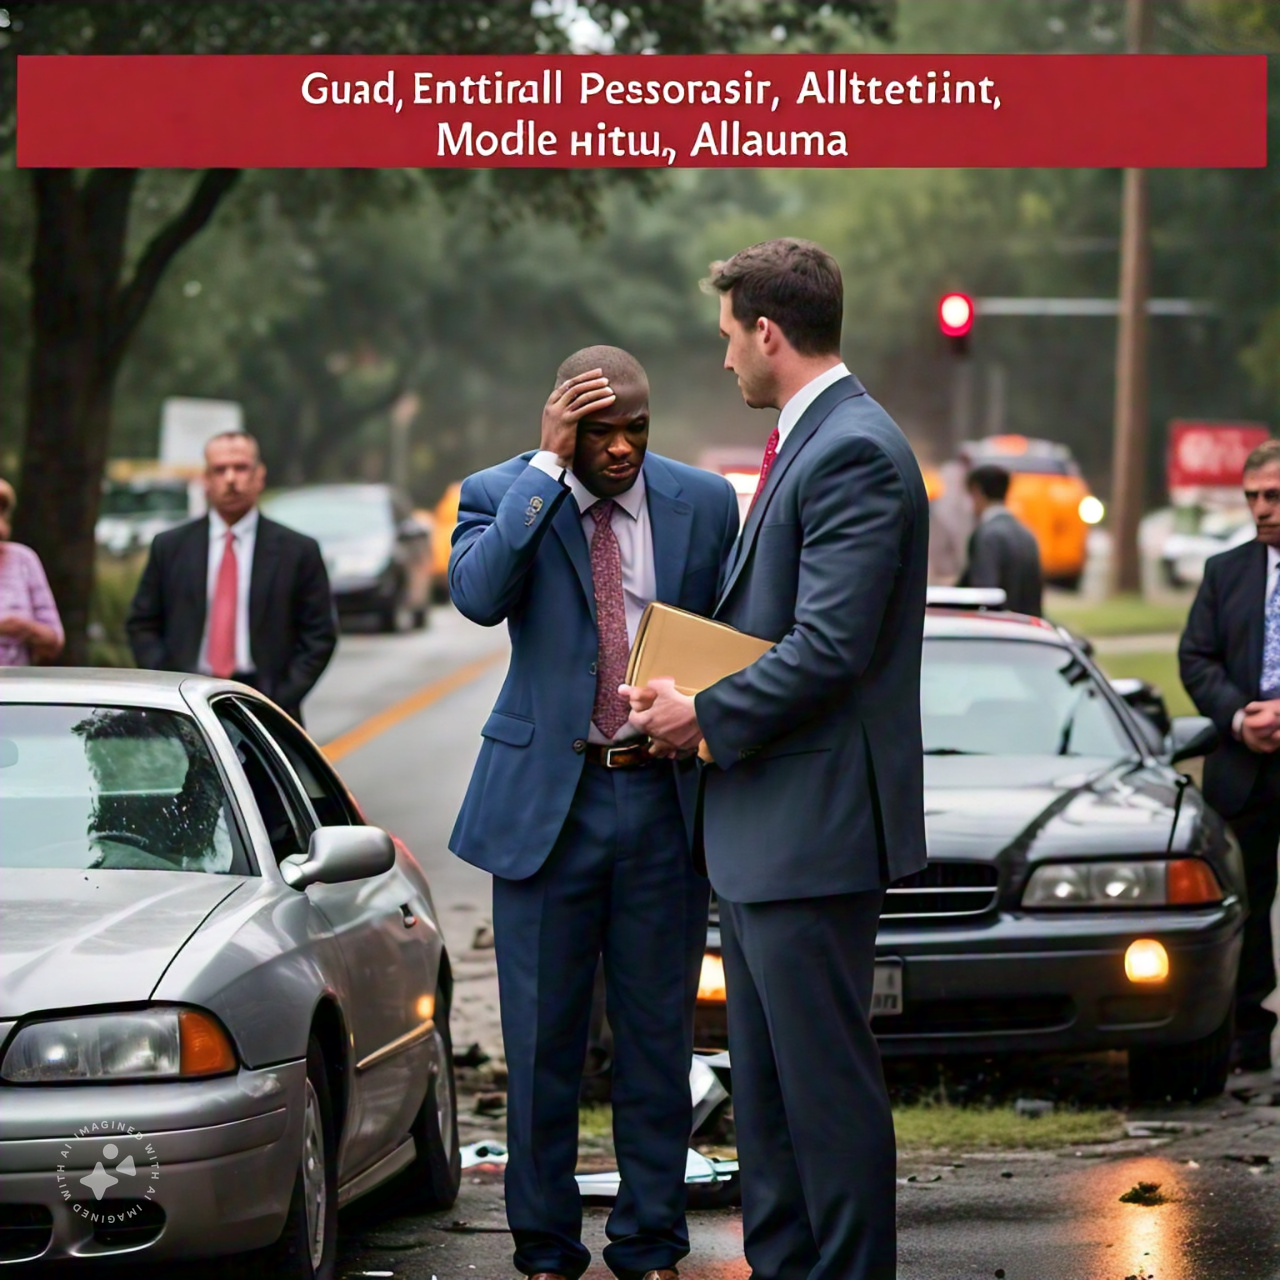 Why Personal Injury Attorneys Are the Best Way to Pursue a Car Accident Case in Mobile, Alabama